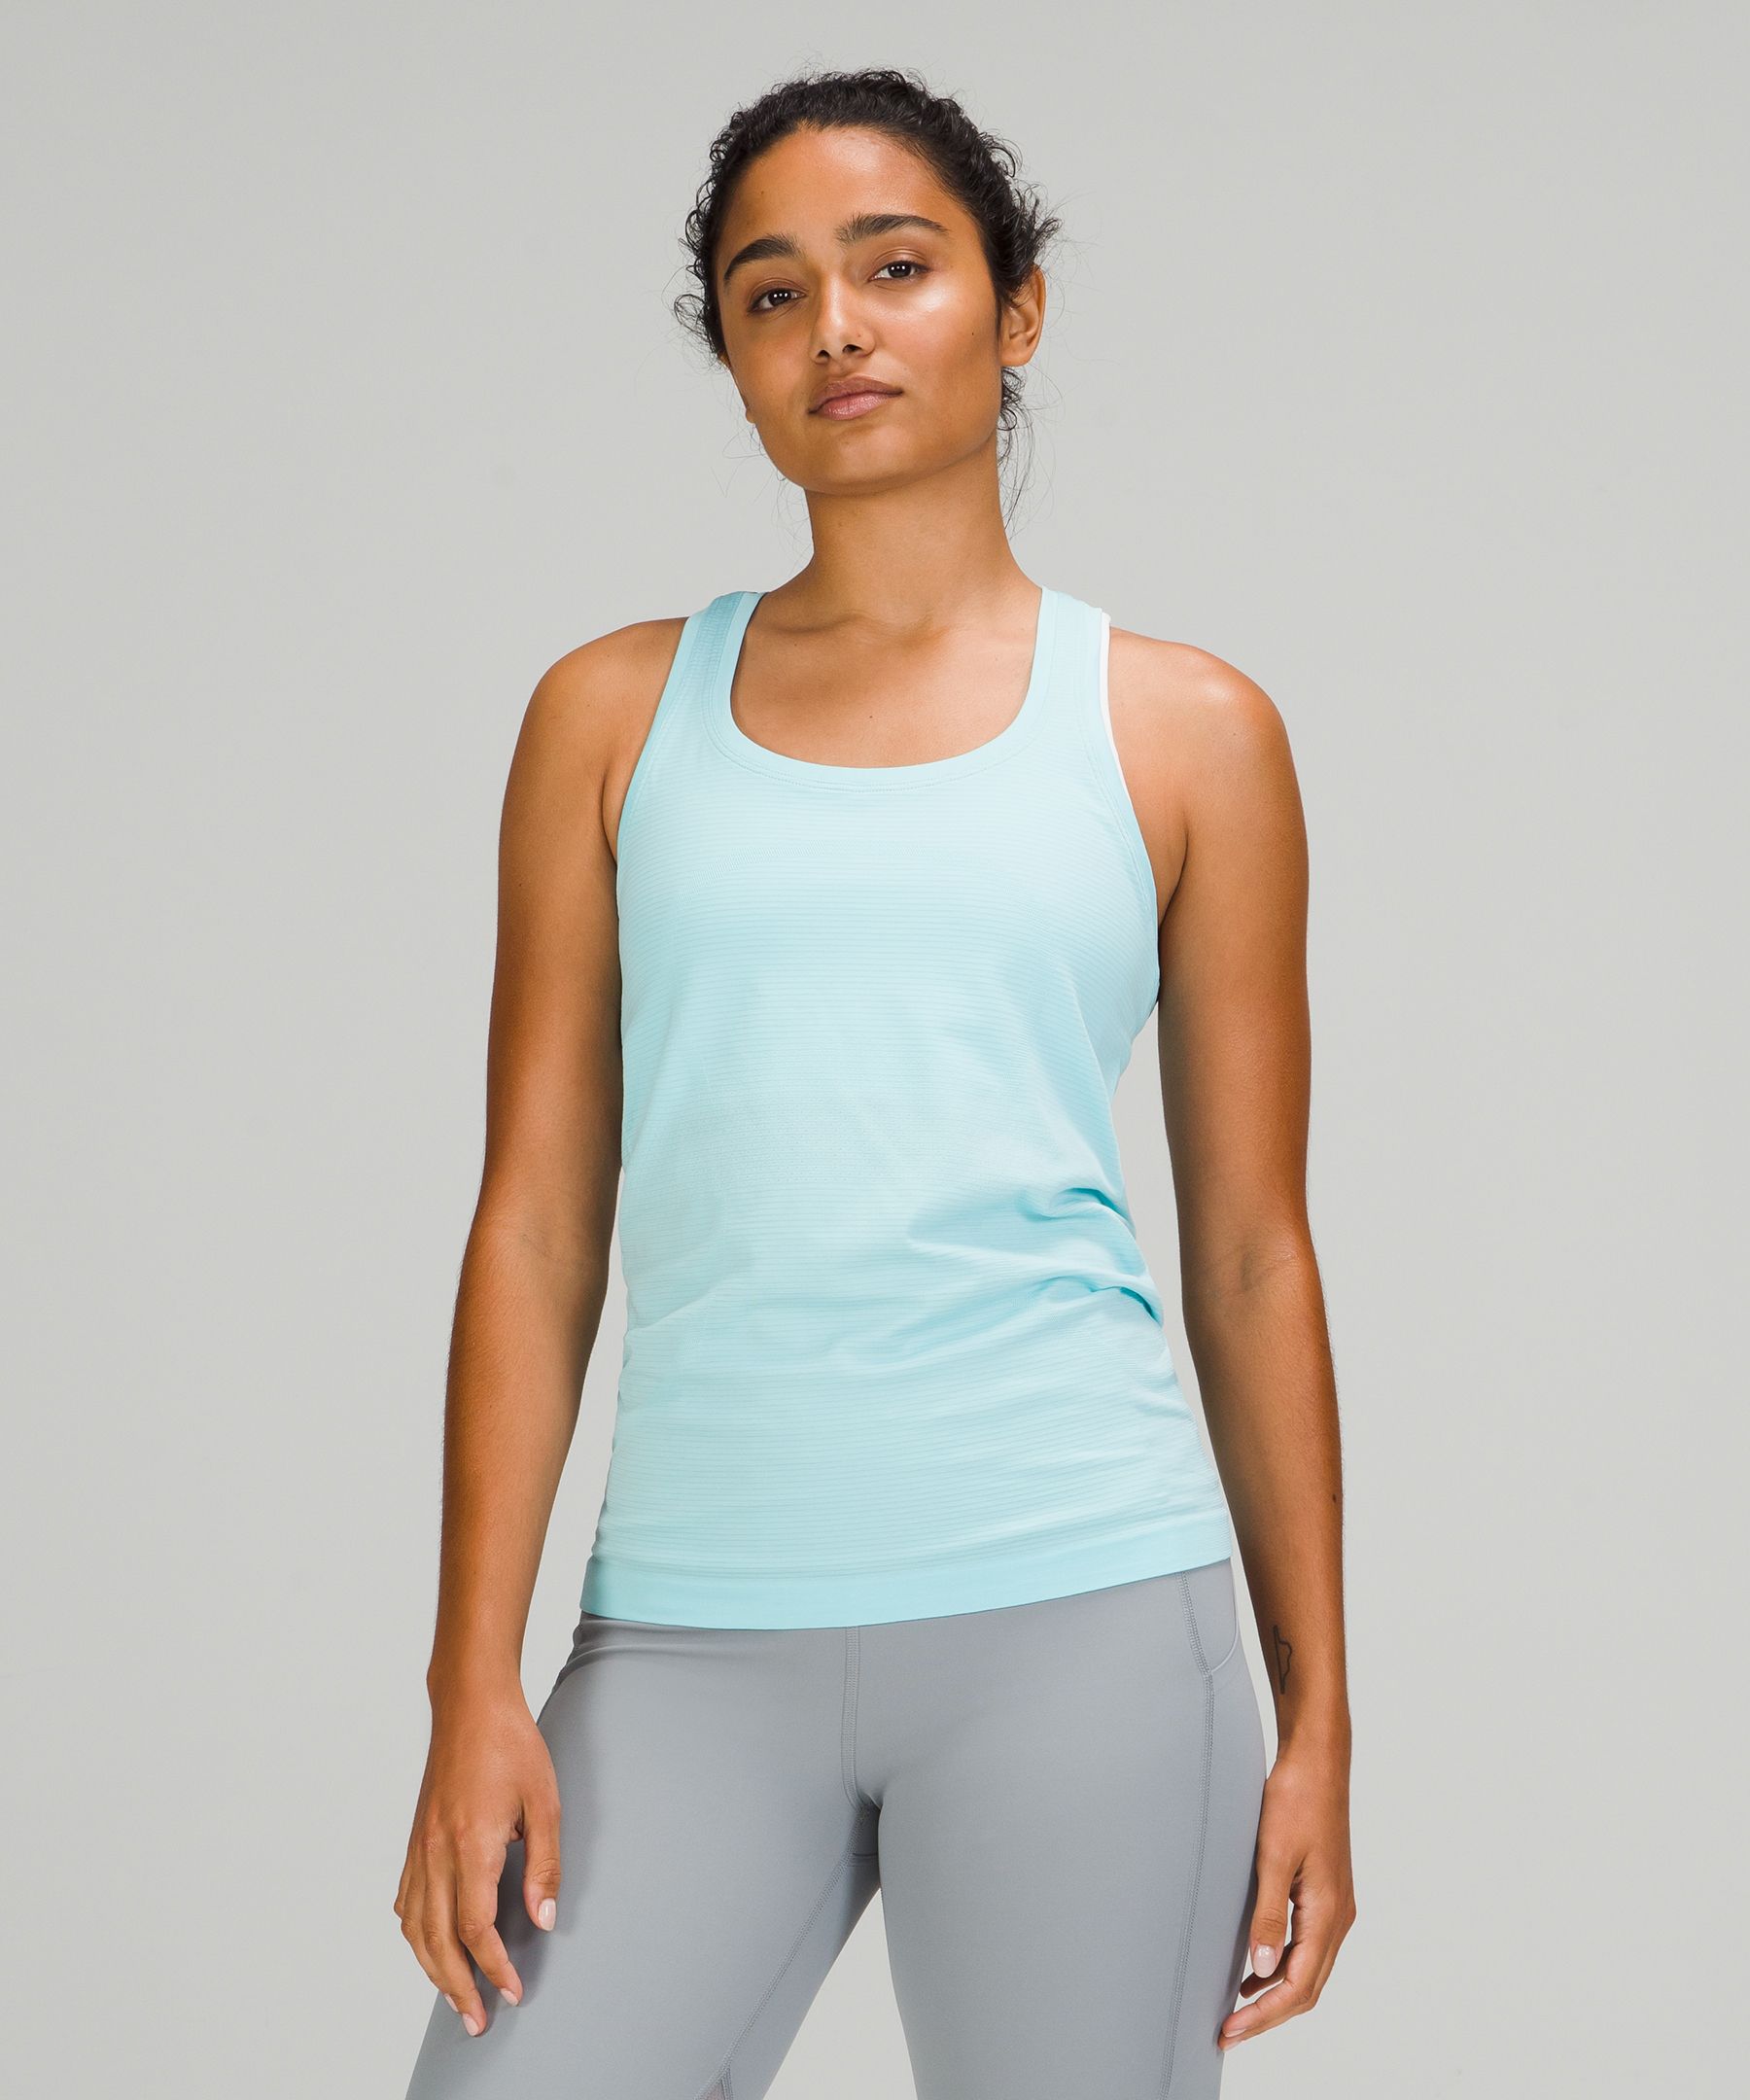 Lululemon Swiftly Tech Racerback Tank Top 2.0 In Icing Blue/icing Blue